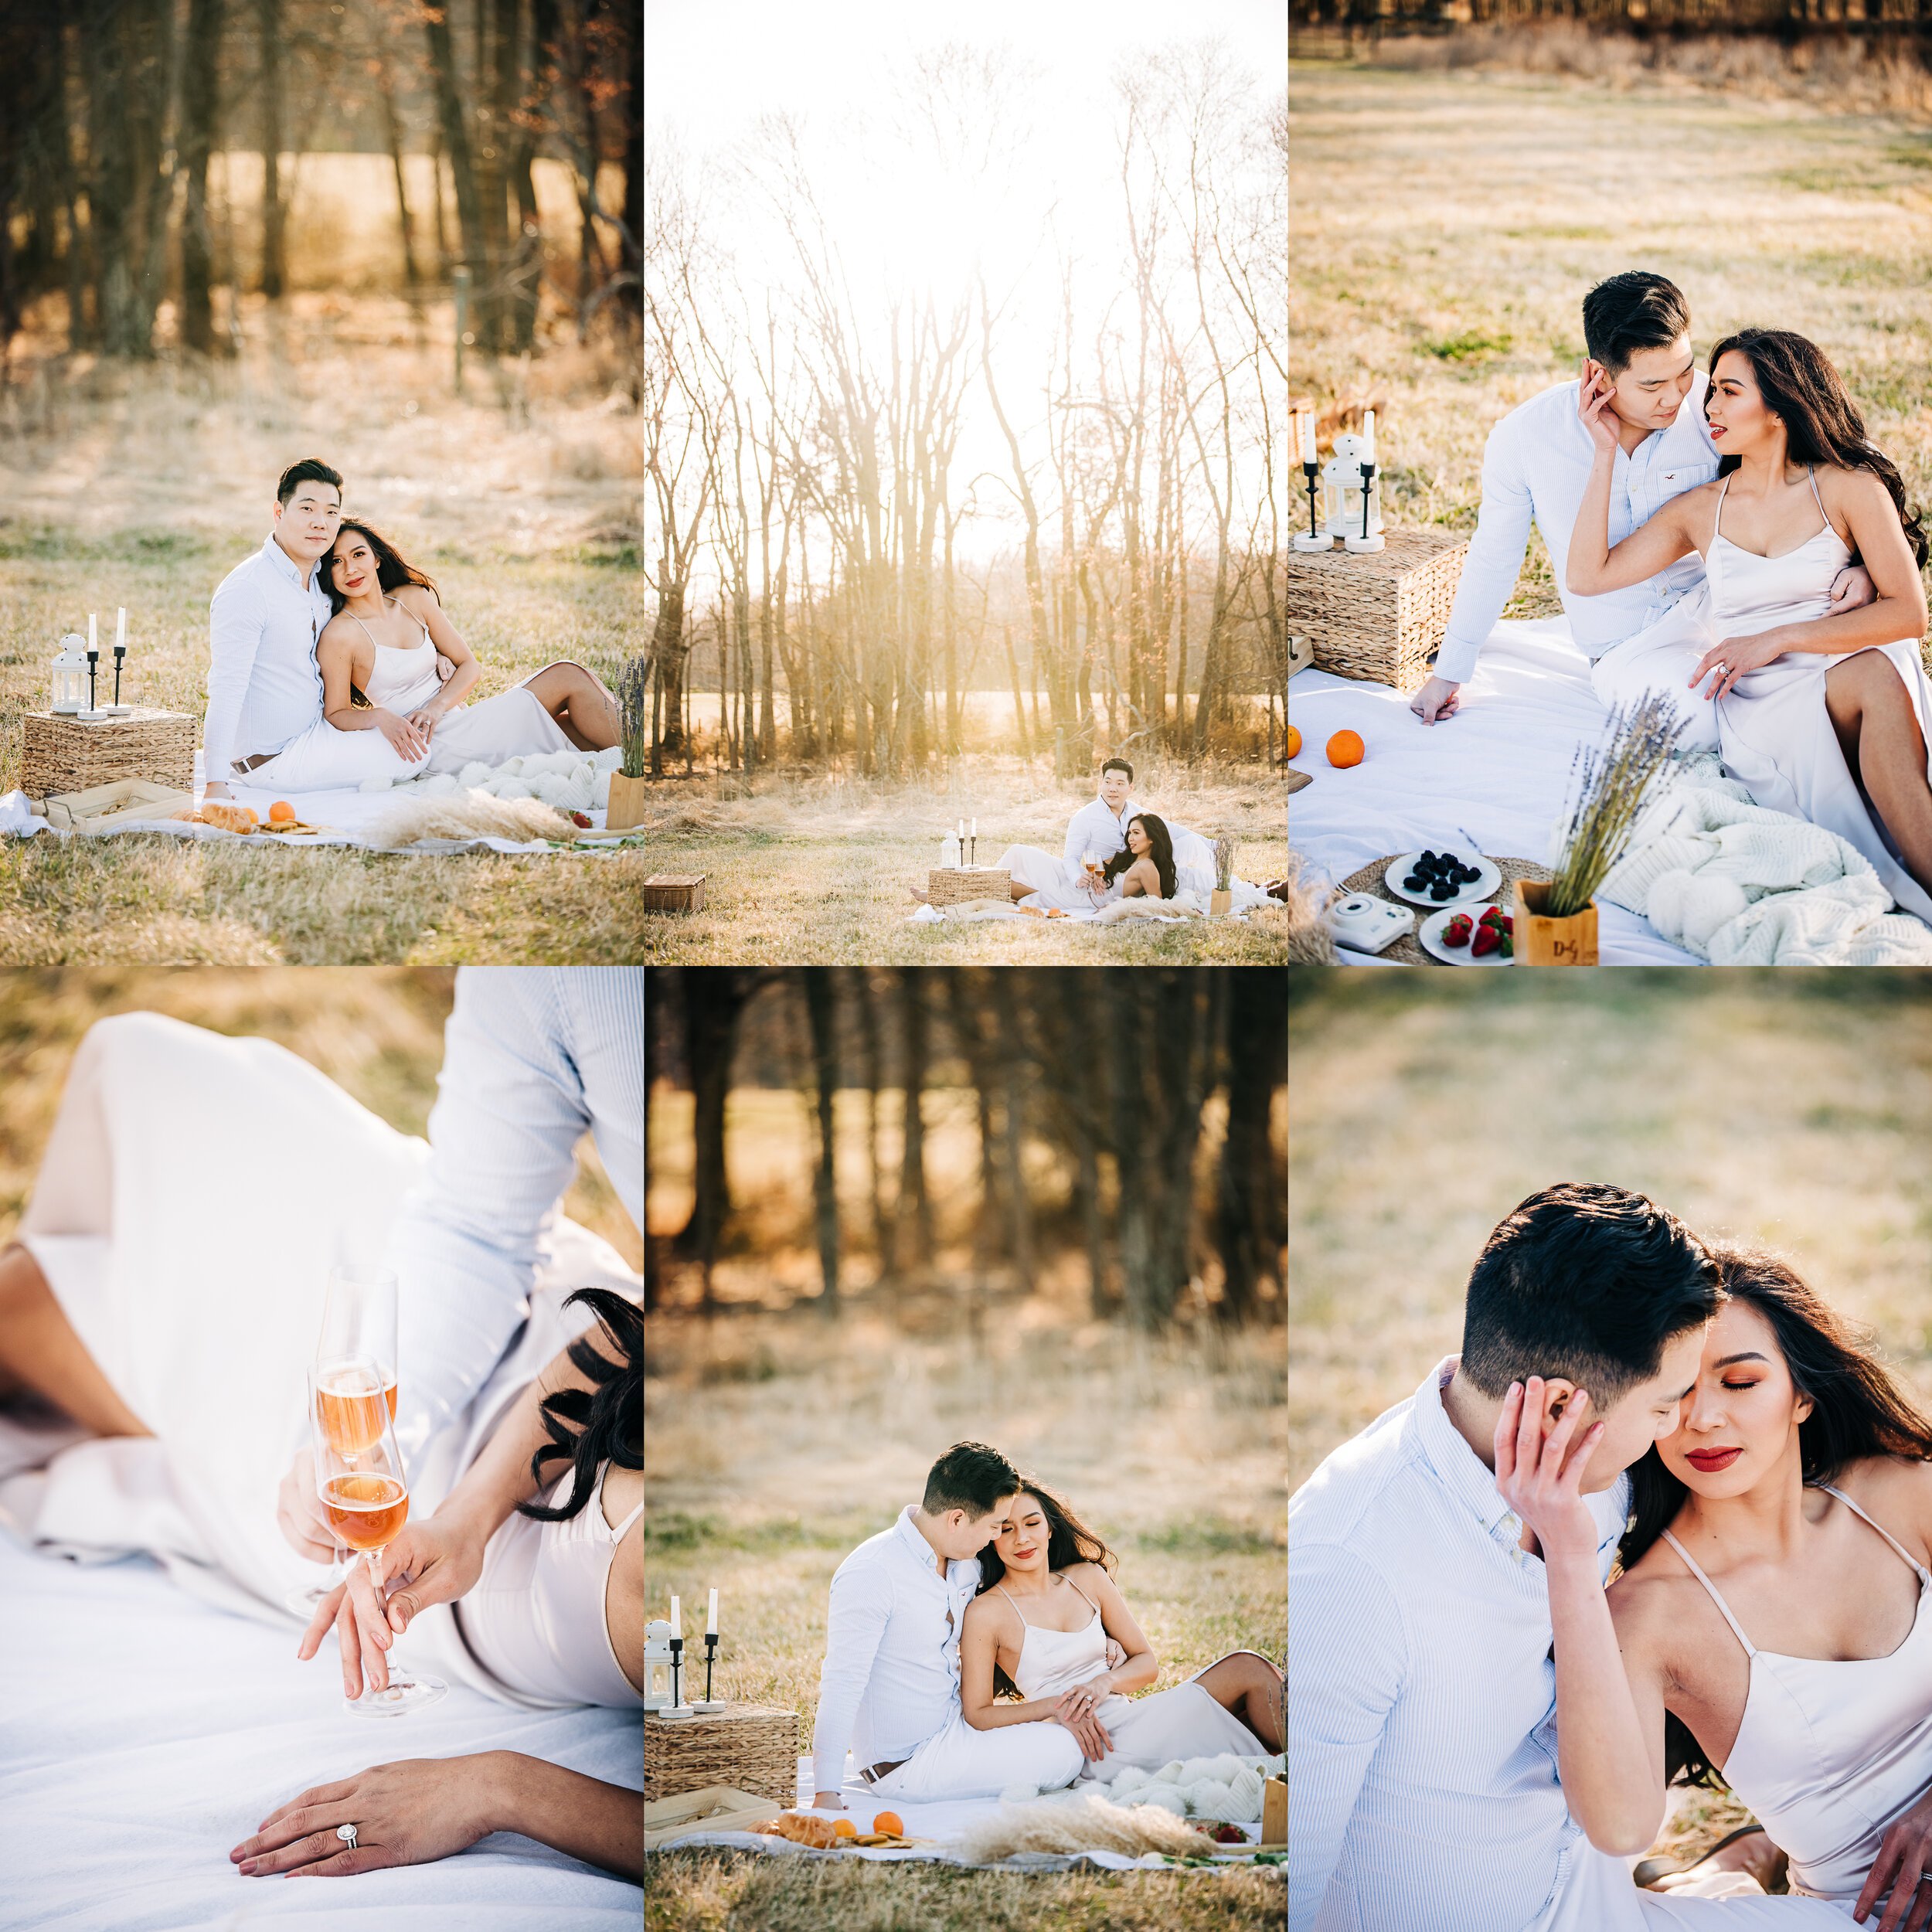 Engagement Session at Lone Oak Farm Brewing Company